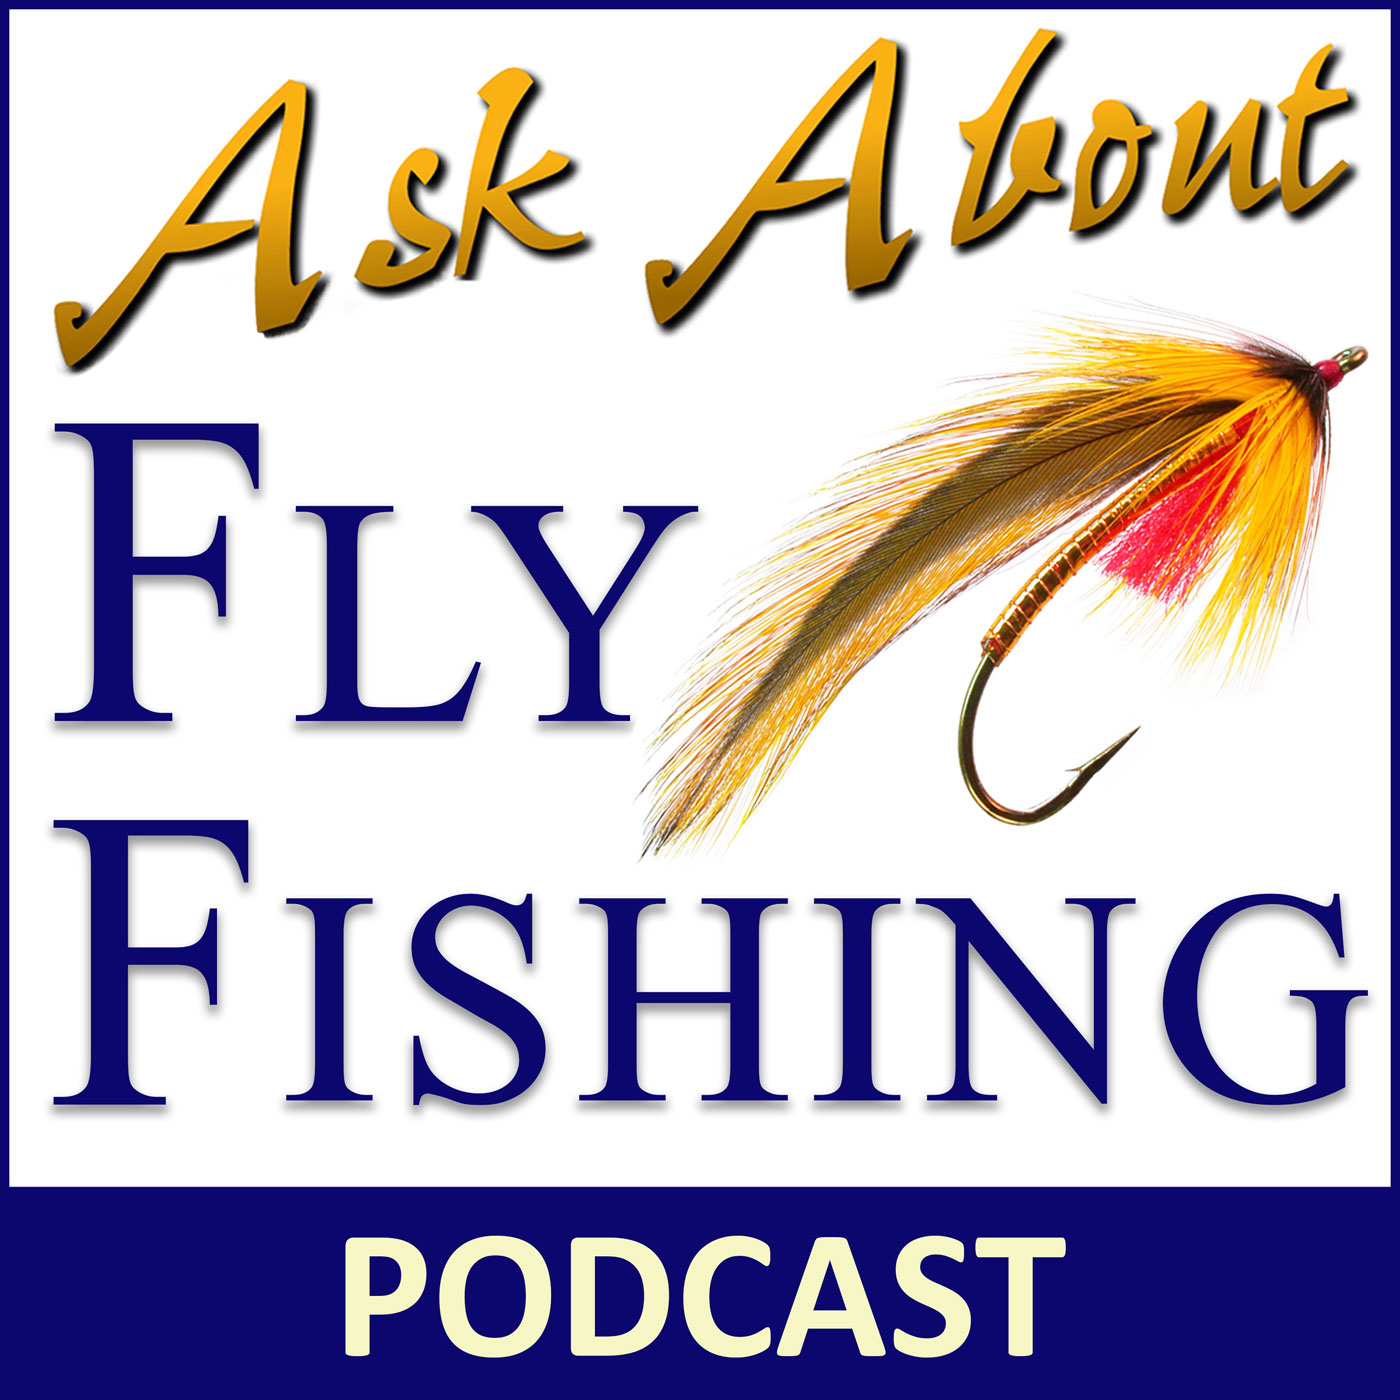 ask about fly fishing